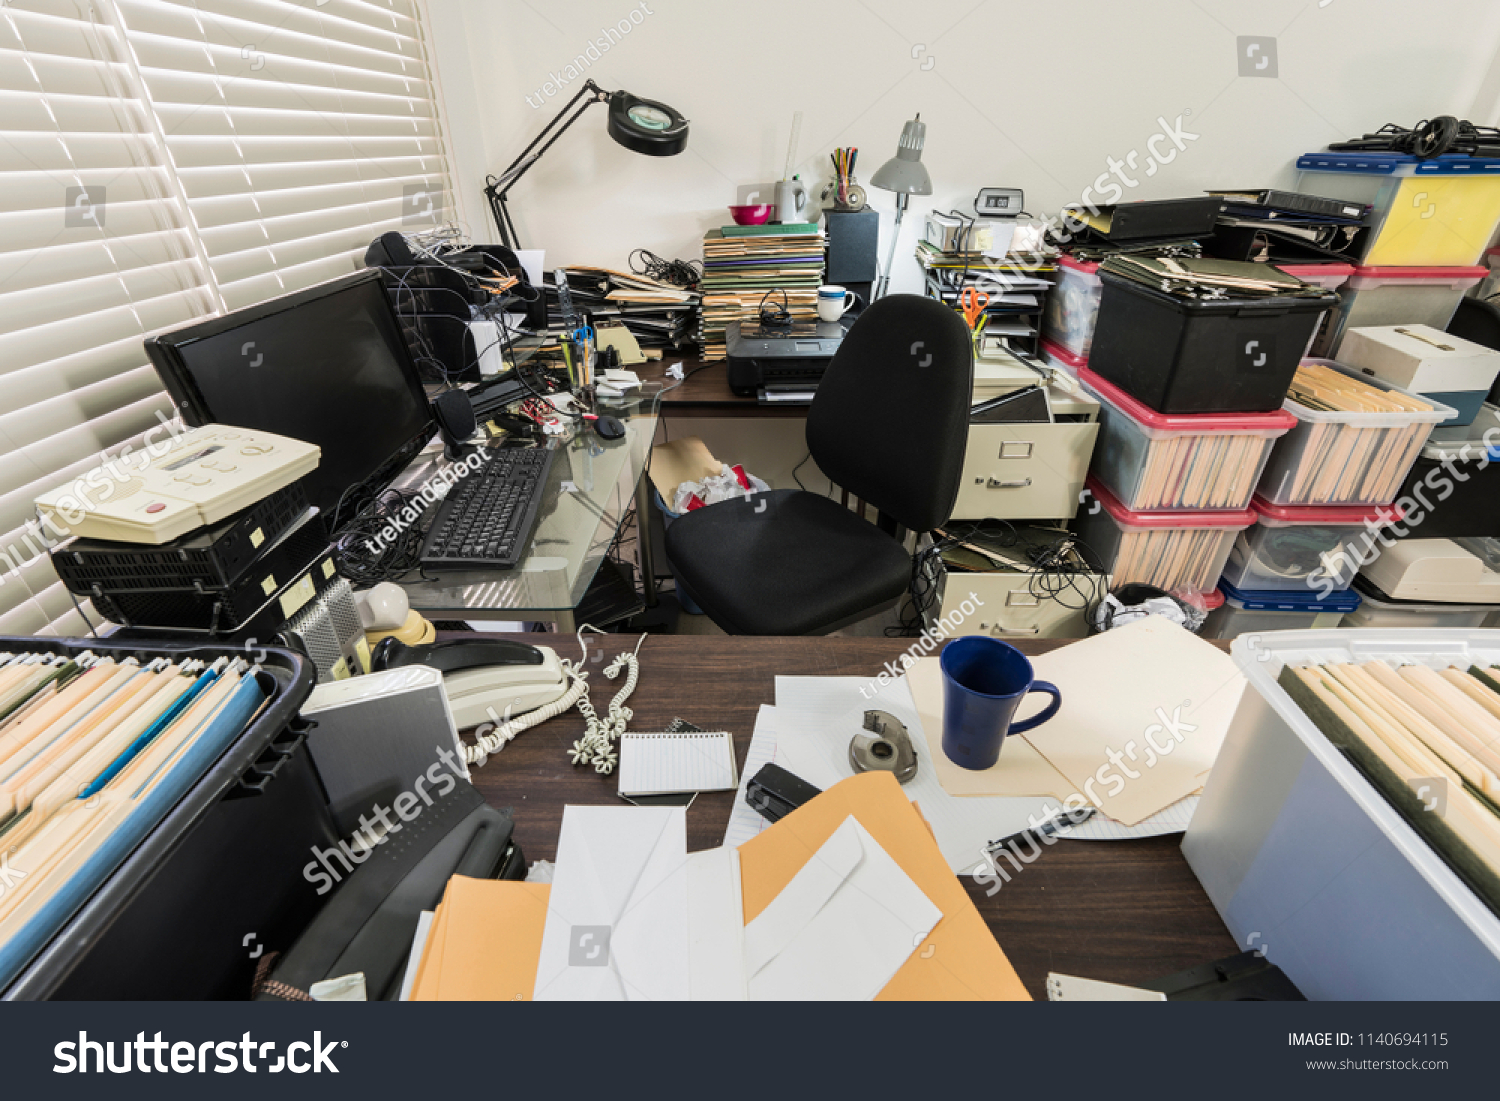 Messy business office with piles of files and disorganized clutter. #1140694115